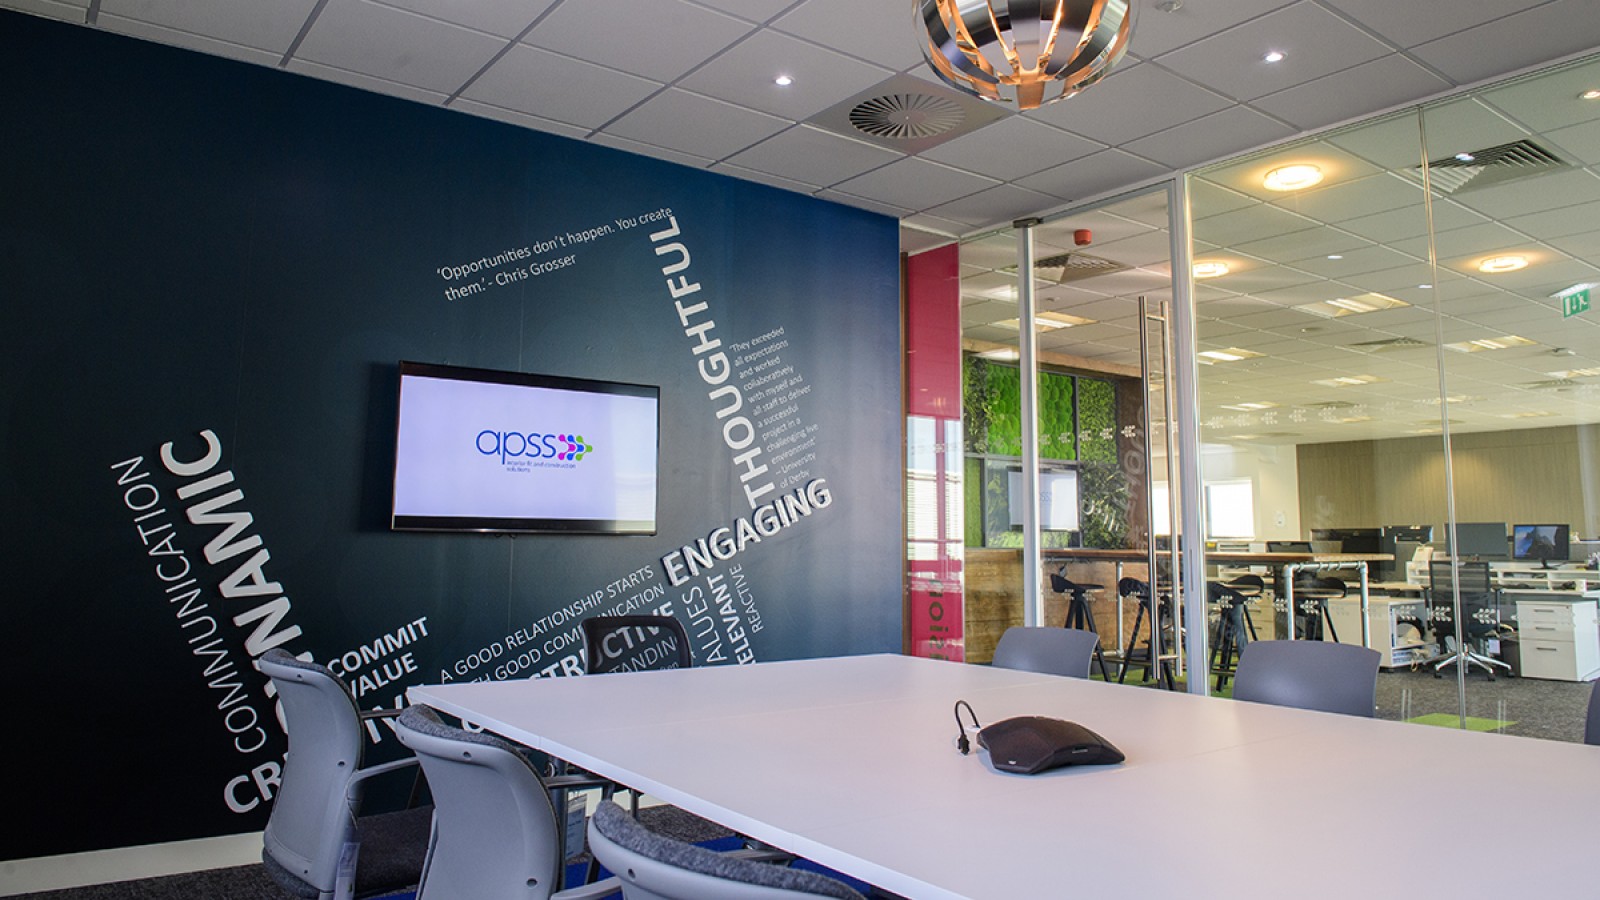 The interior of a newly refurbished office, with a table, chairs, feature wall with text, and screen showing APSS logo